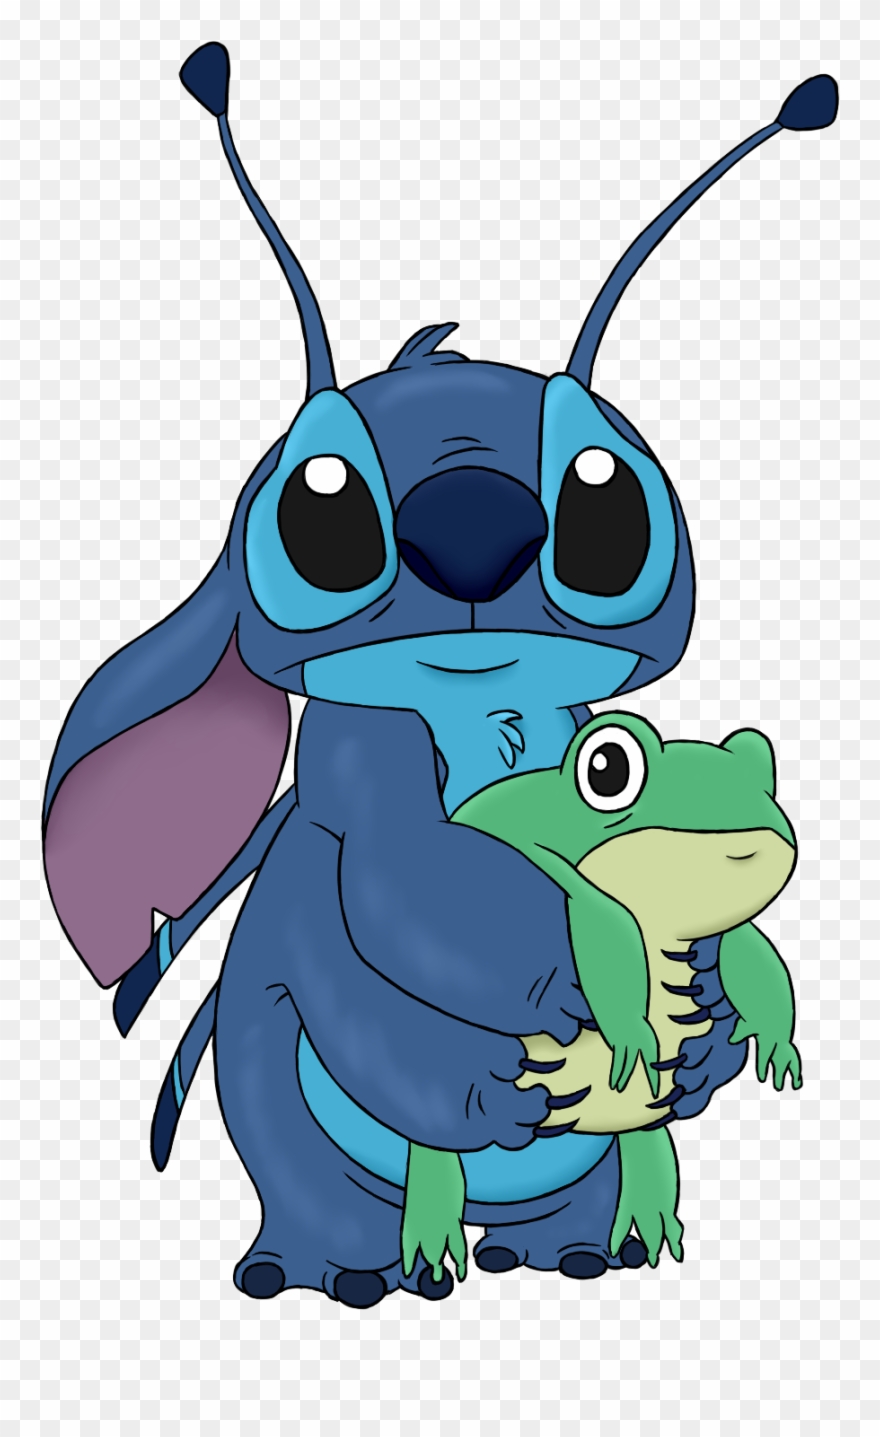 Download Cartoon Lilo And Stitch Vector SVG, PNG, EPS, DXF File